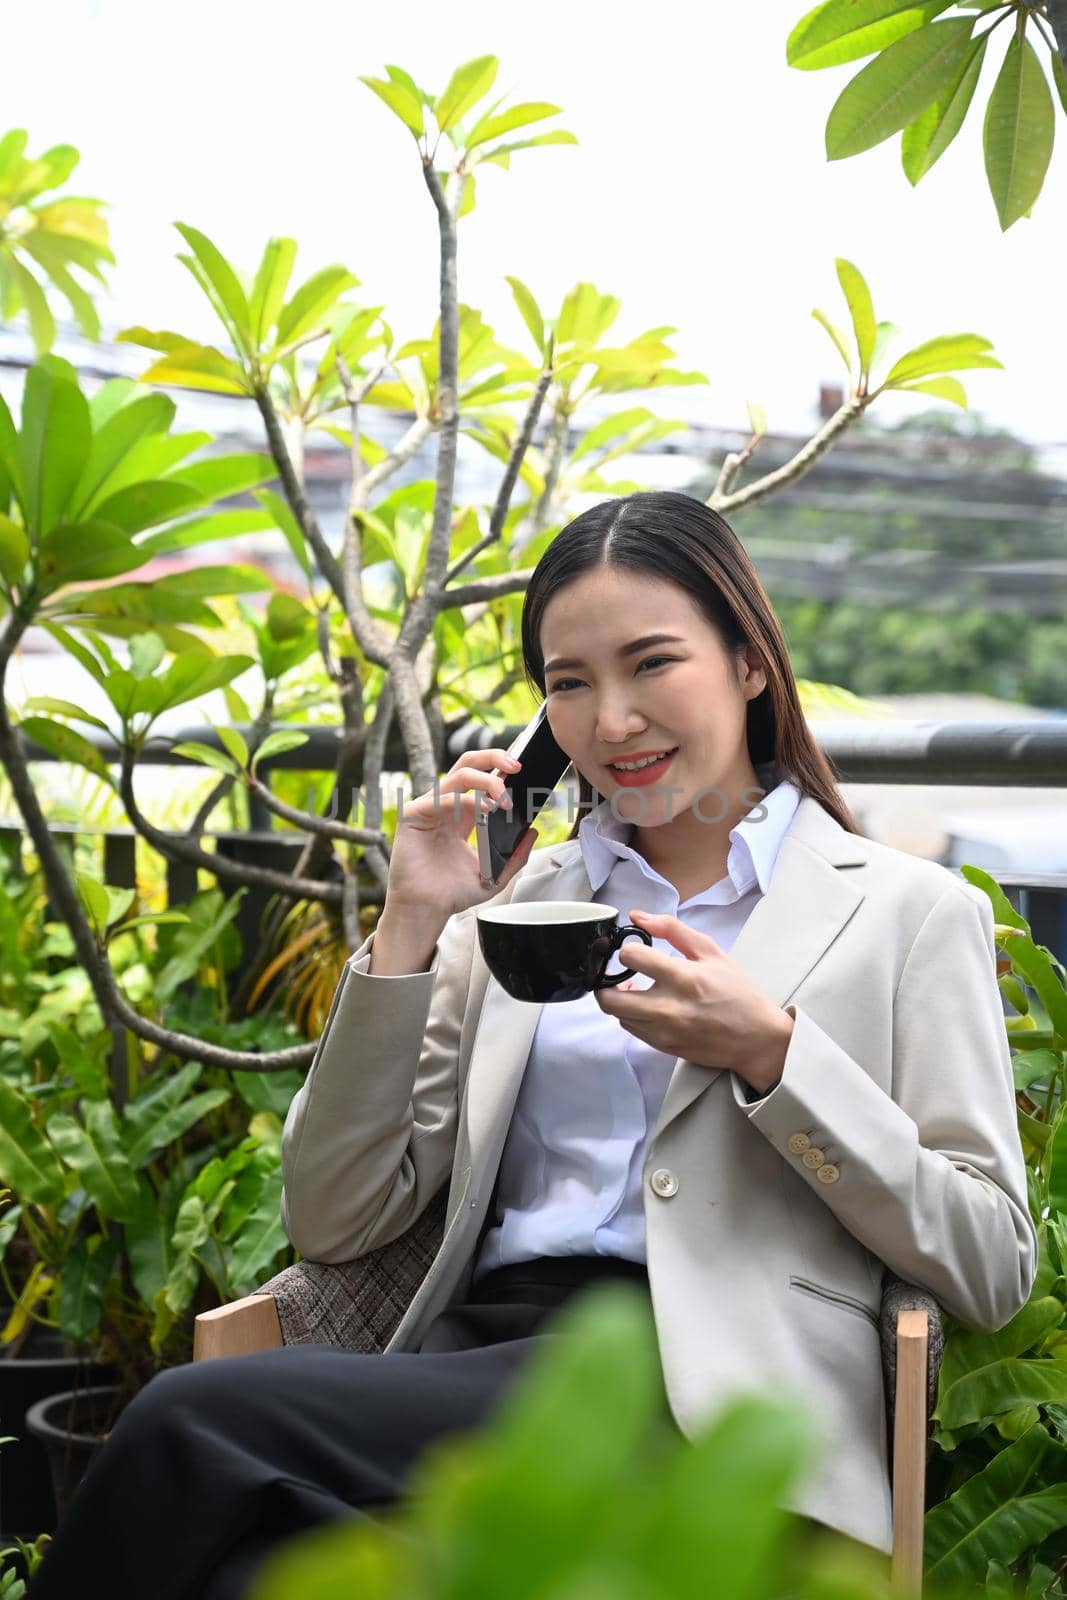 Successful businesswoman having phone conversation while sitting at outdoors cafe surrounded by trees on a beautiful day by prathanchorruangsak